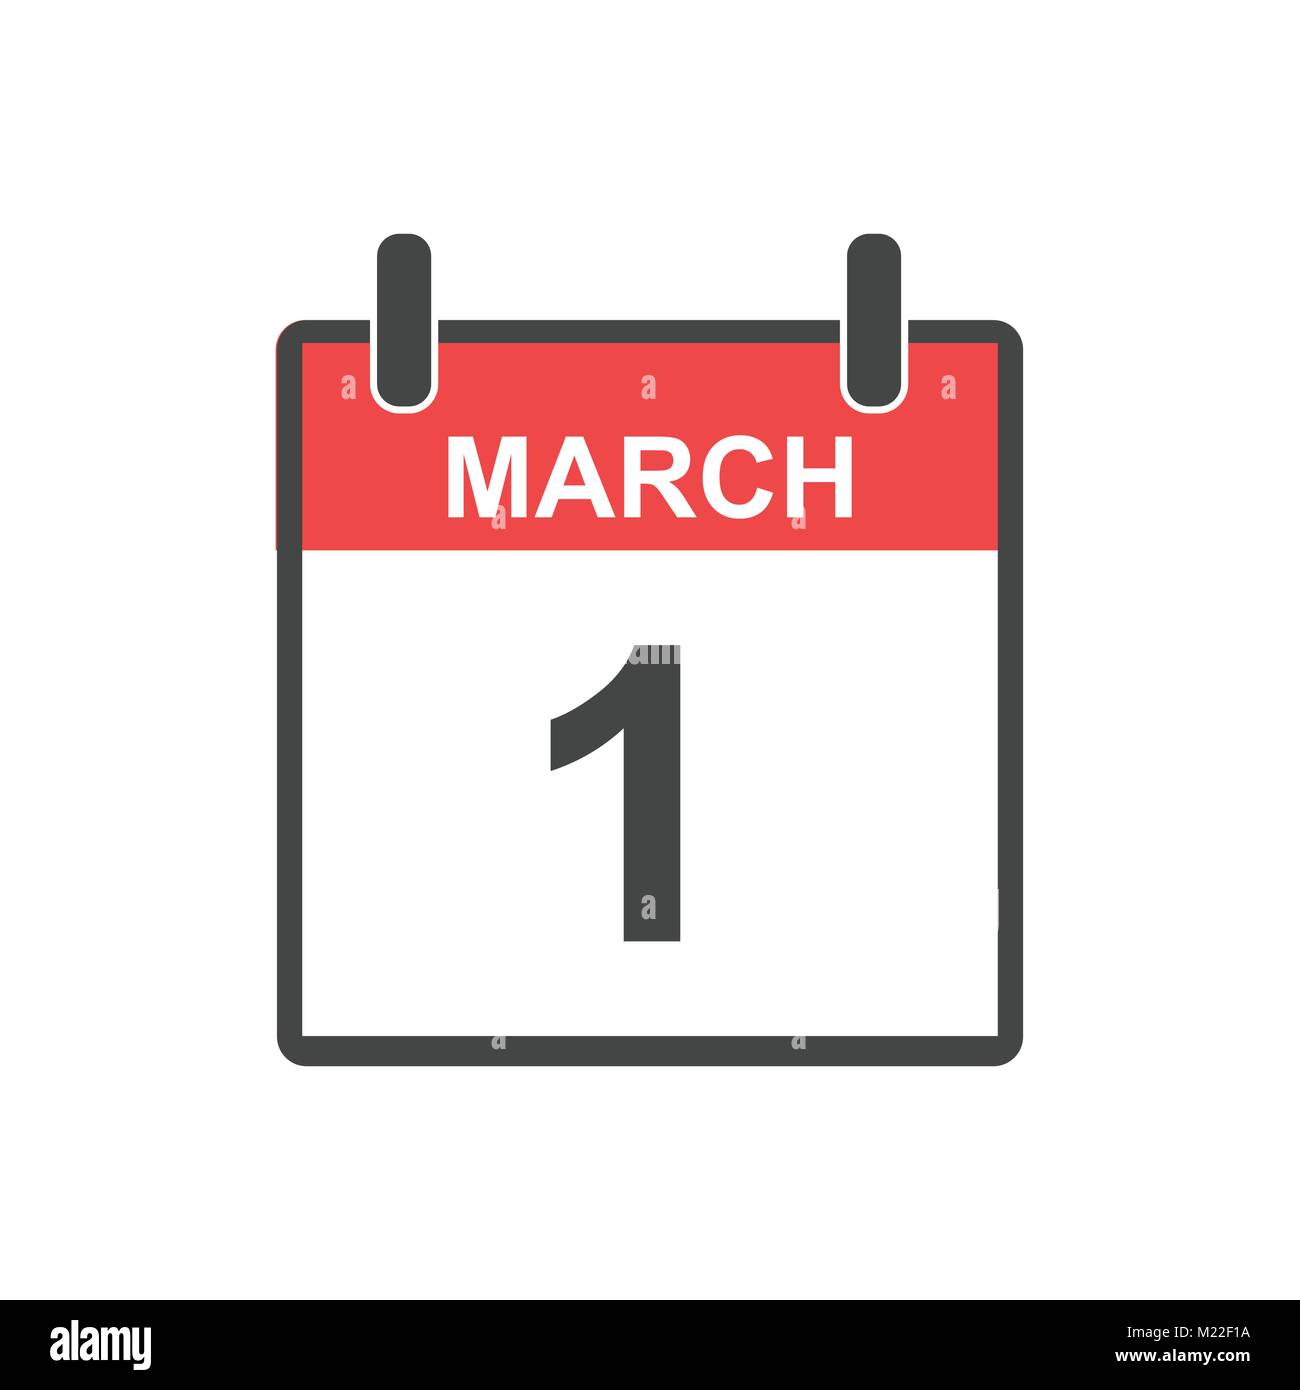 March 1 calendar icon. Vector illustration in flat style. Stock Vector